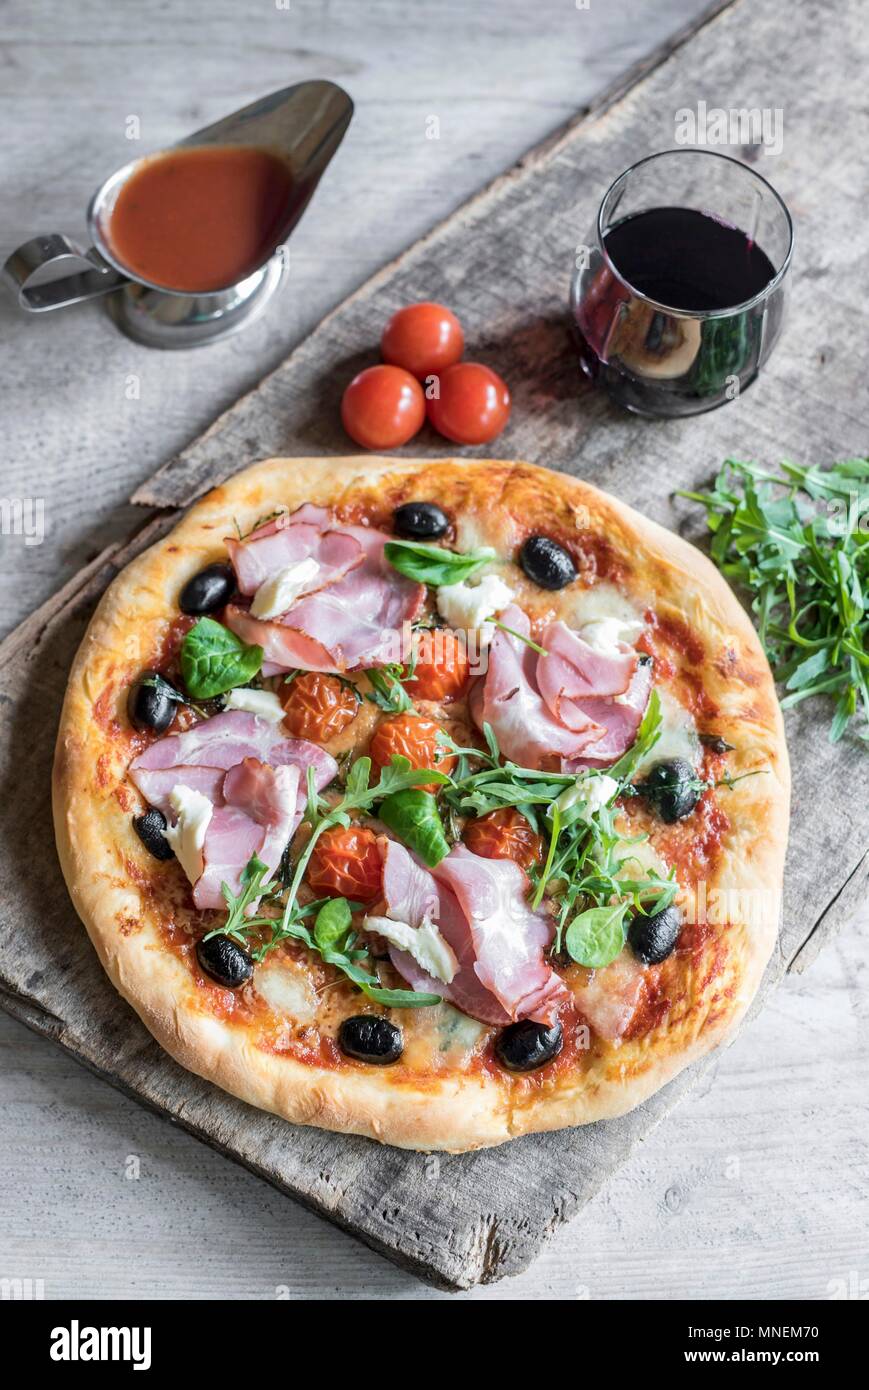 Ham and cheese pizza served on the wooden board Stock Photo